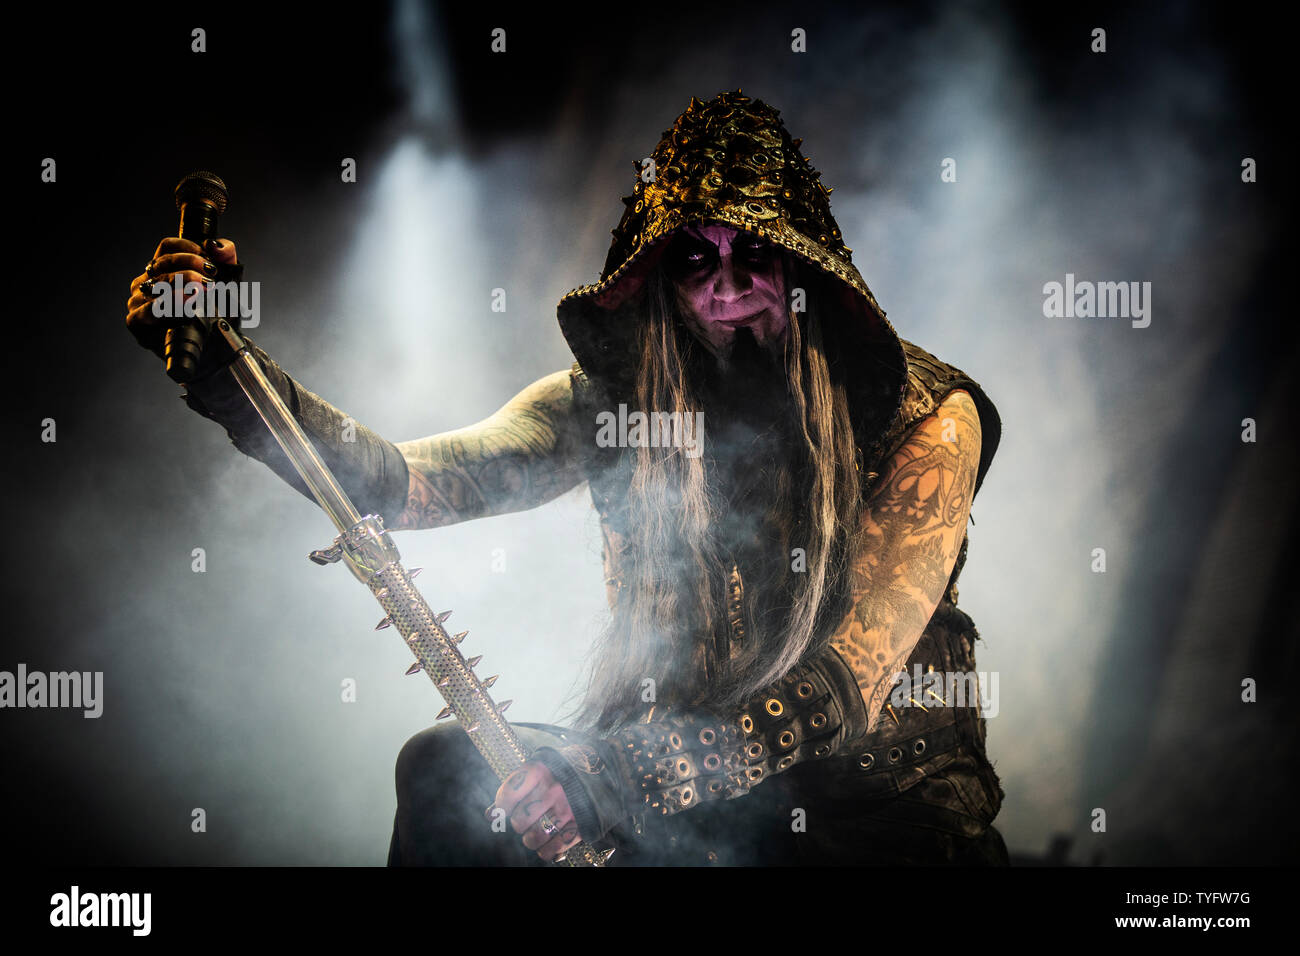 The Norwegian symphonic black metal band Dimmu Borgir performs live at Ole  Bull Scene in Bergen. Here vocalist Shagrath is seen live on stage. Norway,  28/05 2012 Stock Photo - Alamy